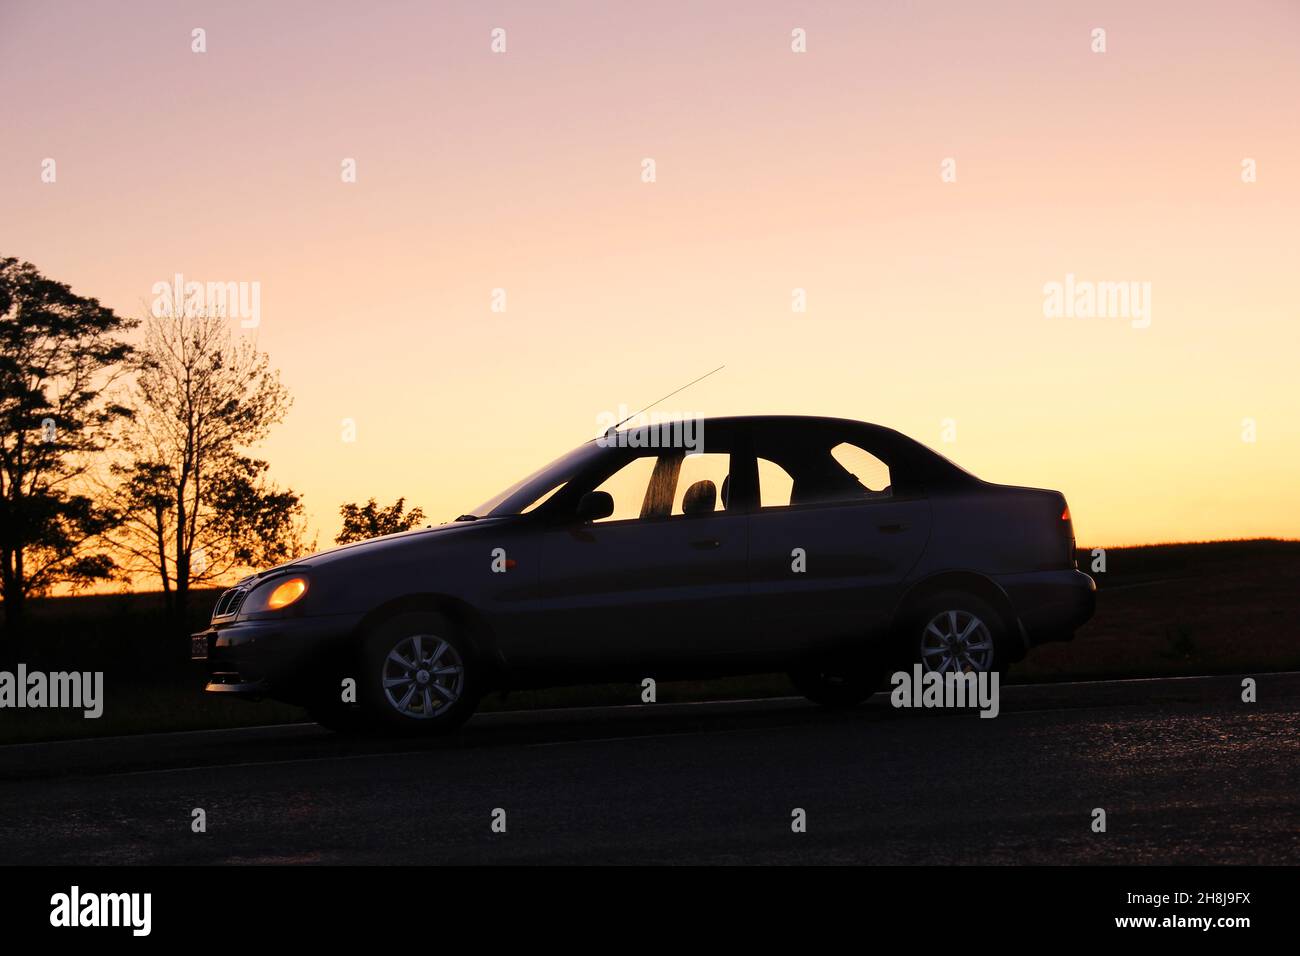 Chernihiv, Ukraine - September 9, 2020: Daewoo Sens on the background of a field and sunset Stock Photo